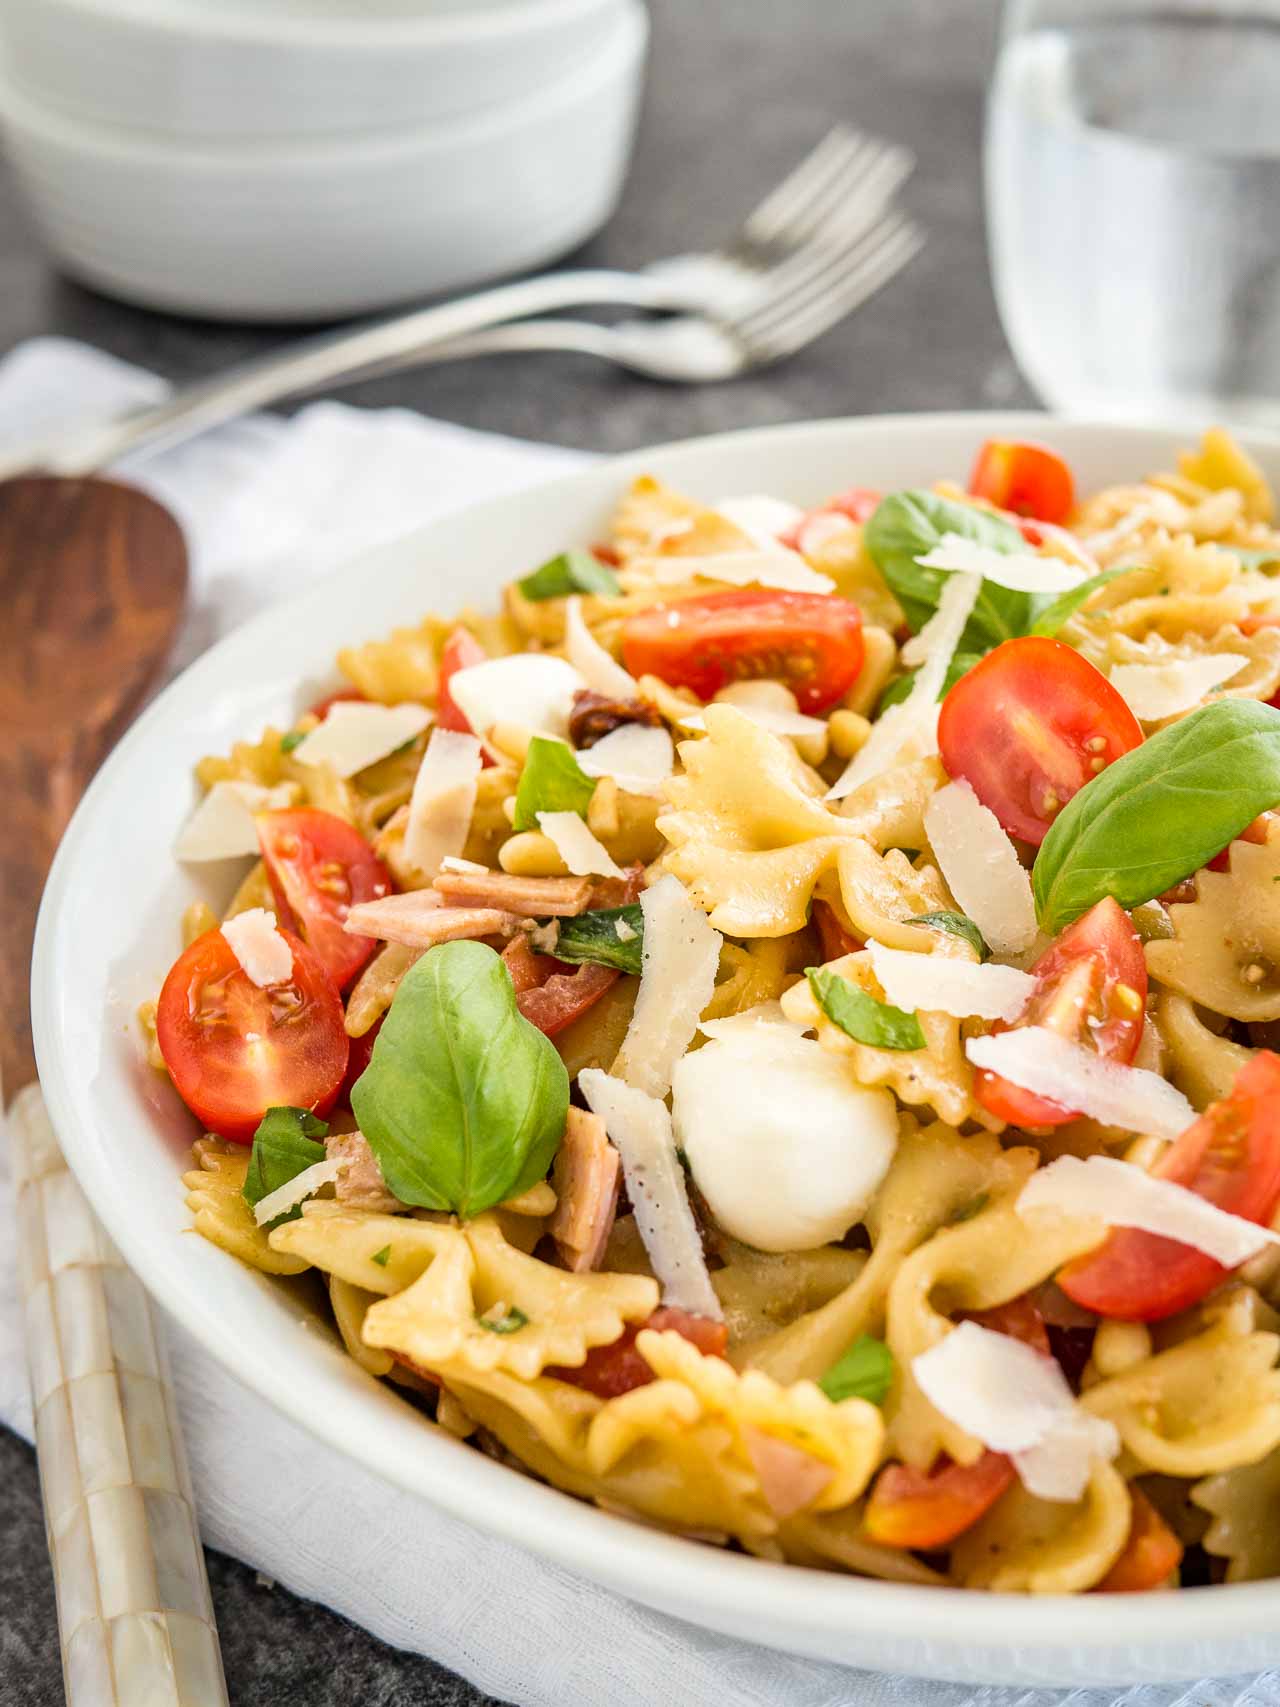 Close-up of a white bowl with pasta salad with Italian dressing, with tomato, mozzarella, basil leaves and shavings of Parmiggiano. The bowl is sitting on a white dishtowel with forks, a glass of water and salad tongs in the background.